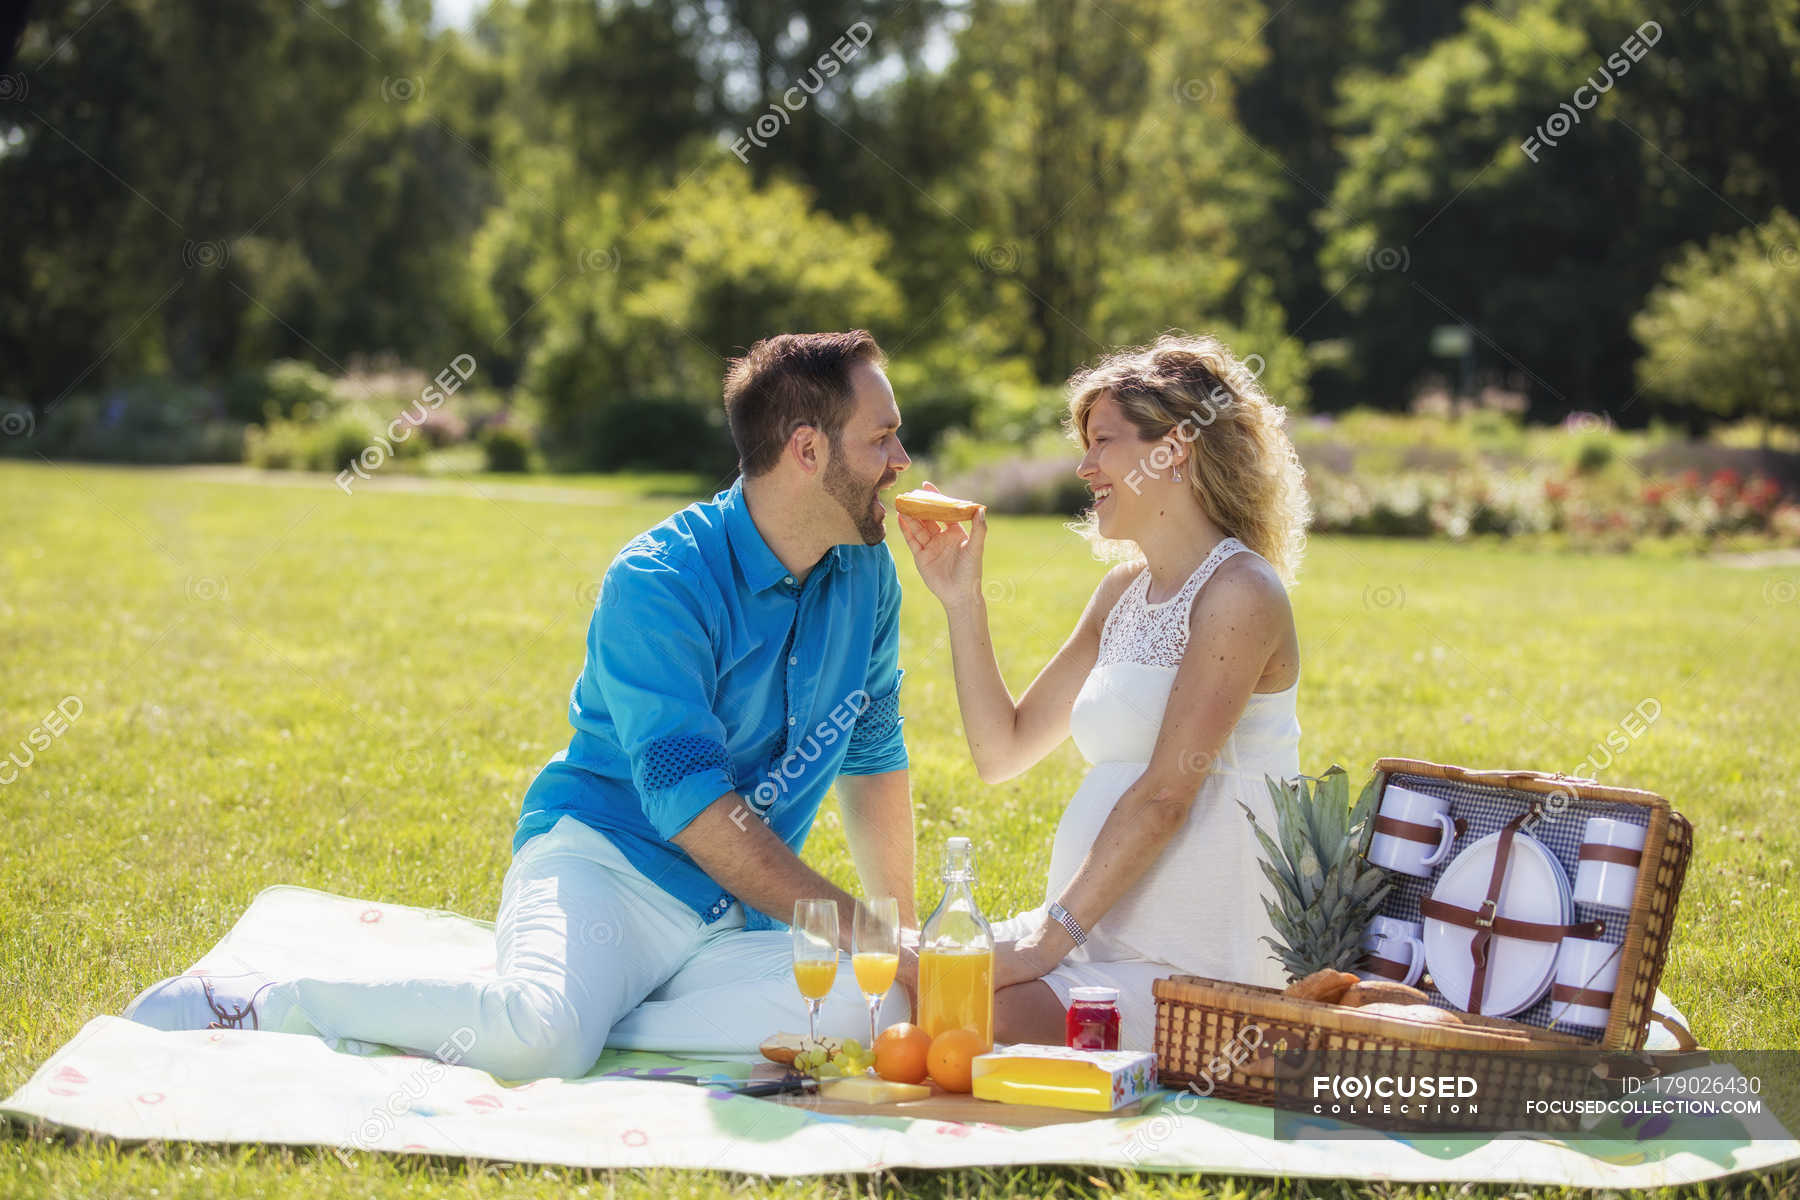 Image of Couple having picnic outdoors